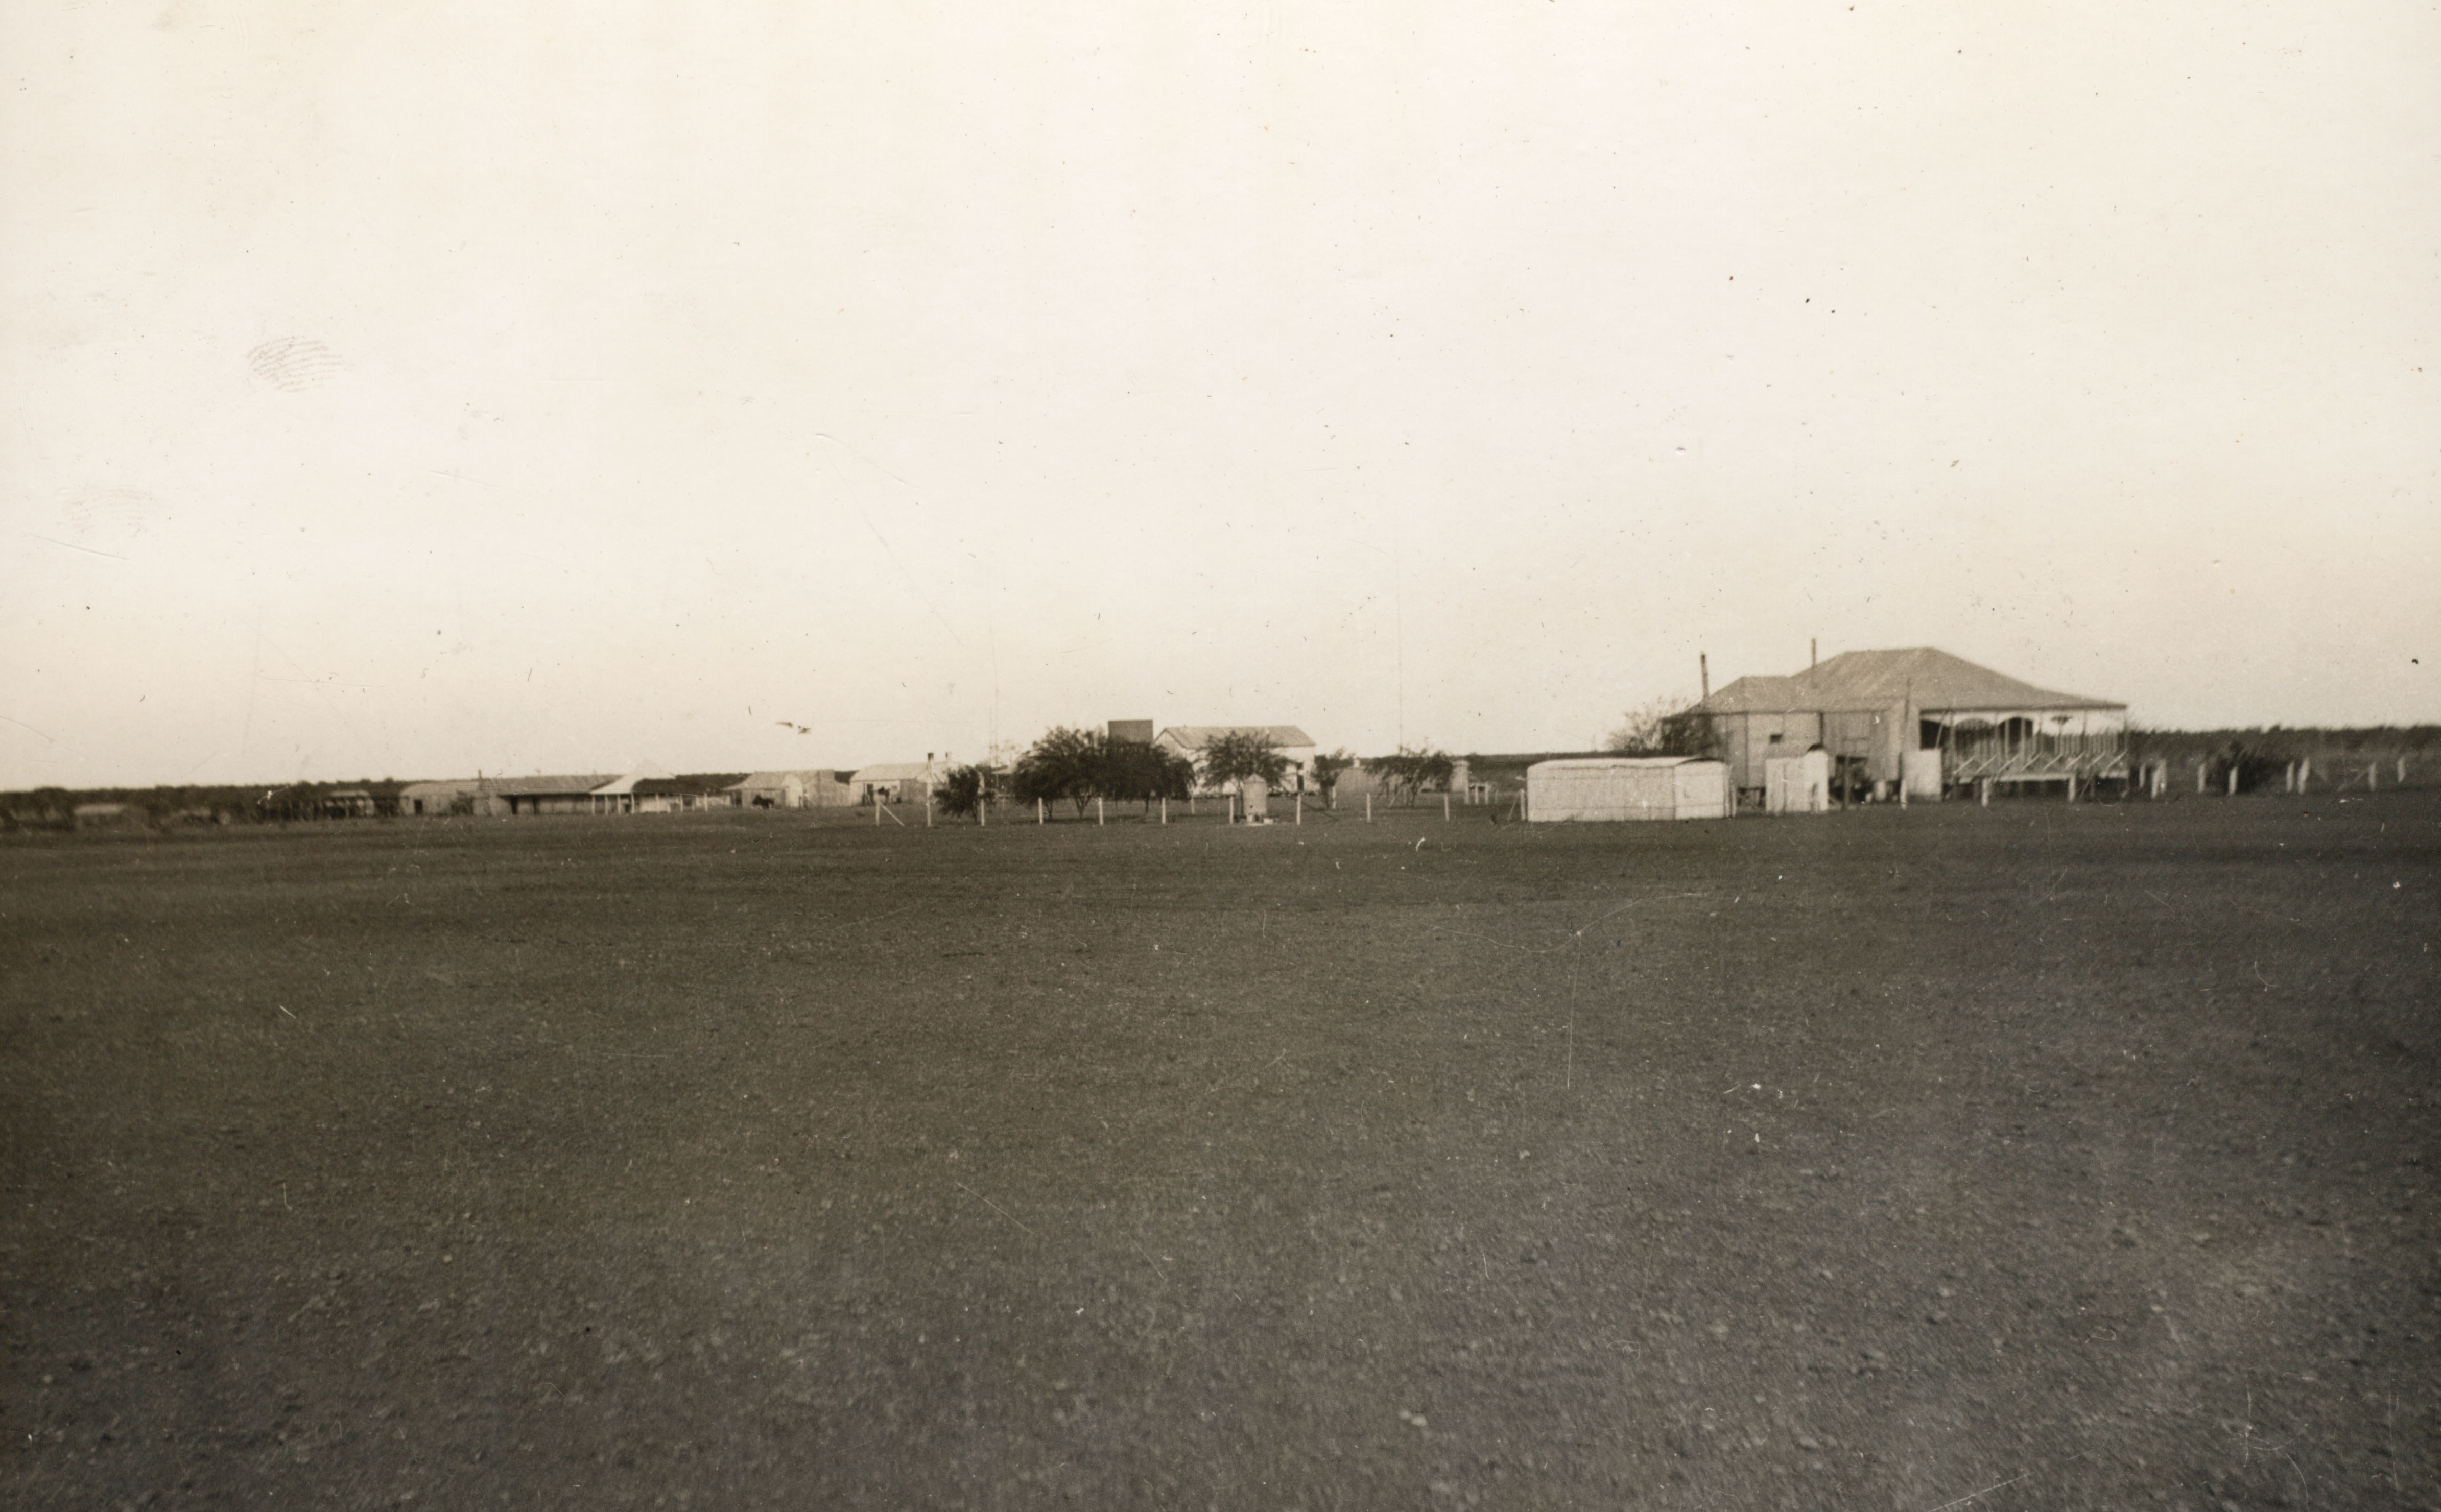 Homestead and outbuildings, Brunette Downs Station, Northern Territory, 24 July 1934 (Z241-211). 